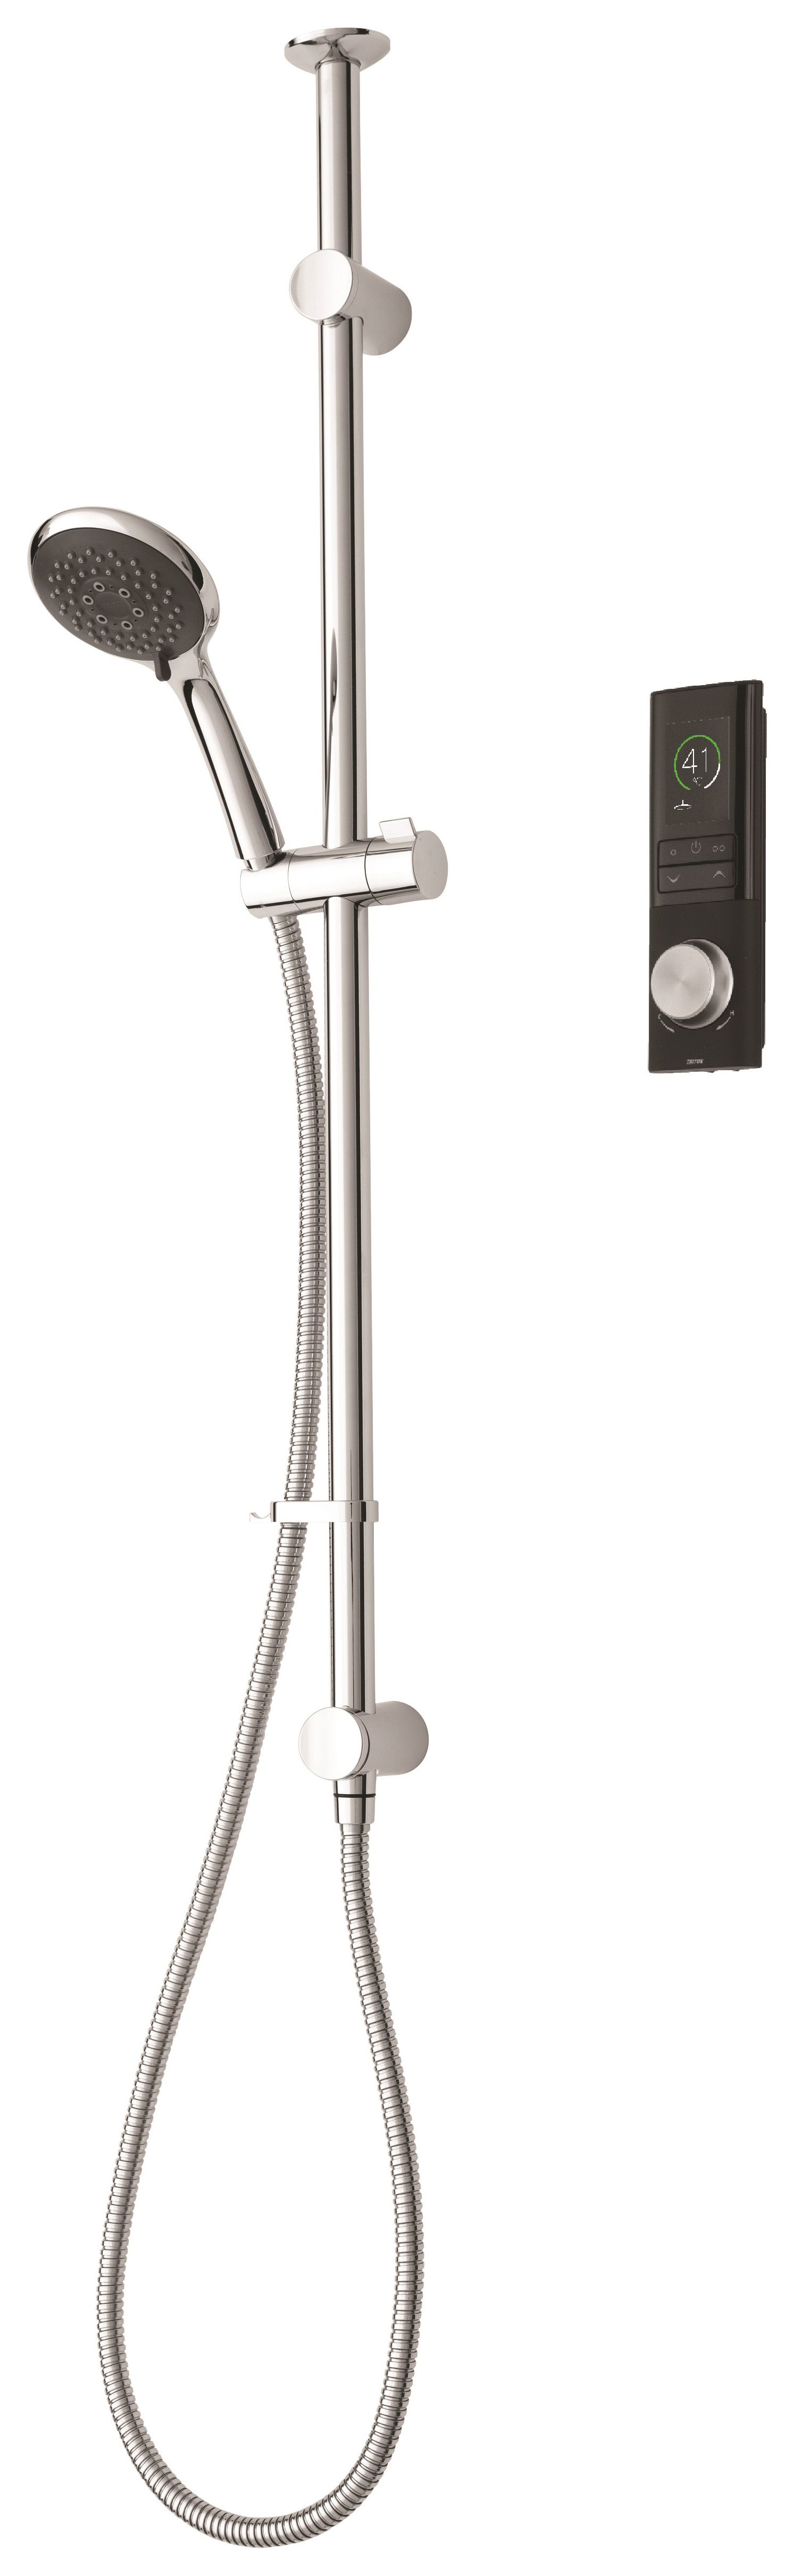 Image of Triton Home Digital Mixer Shower with Riser Rail - Unpumped